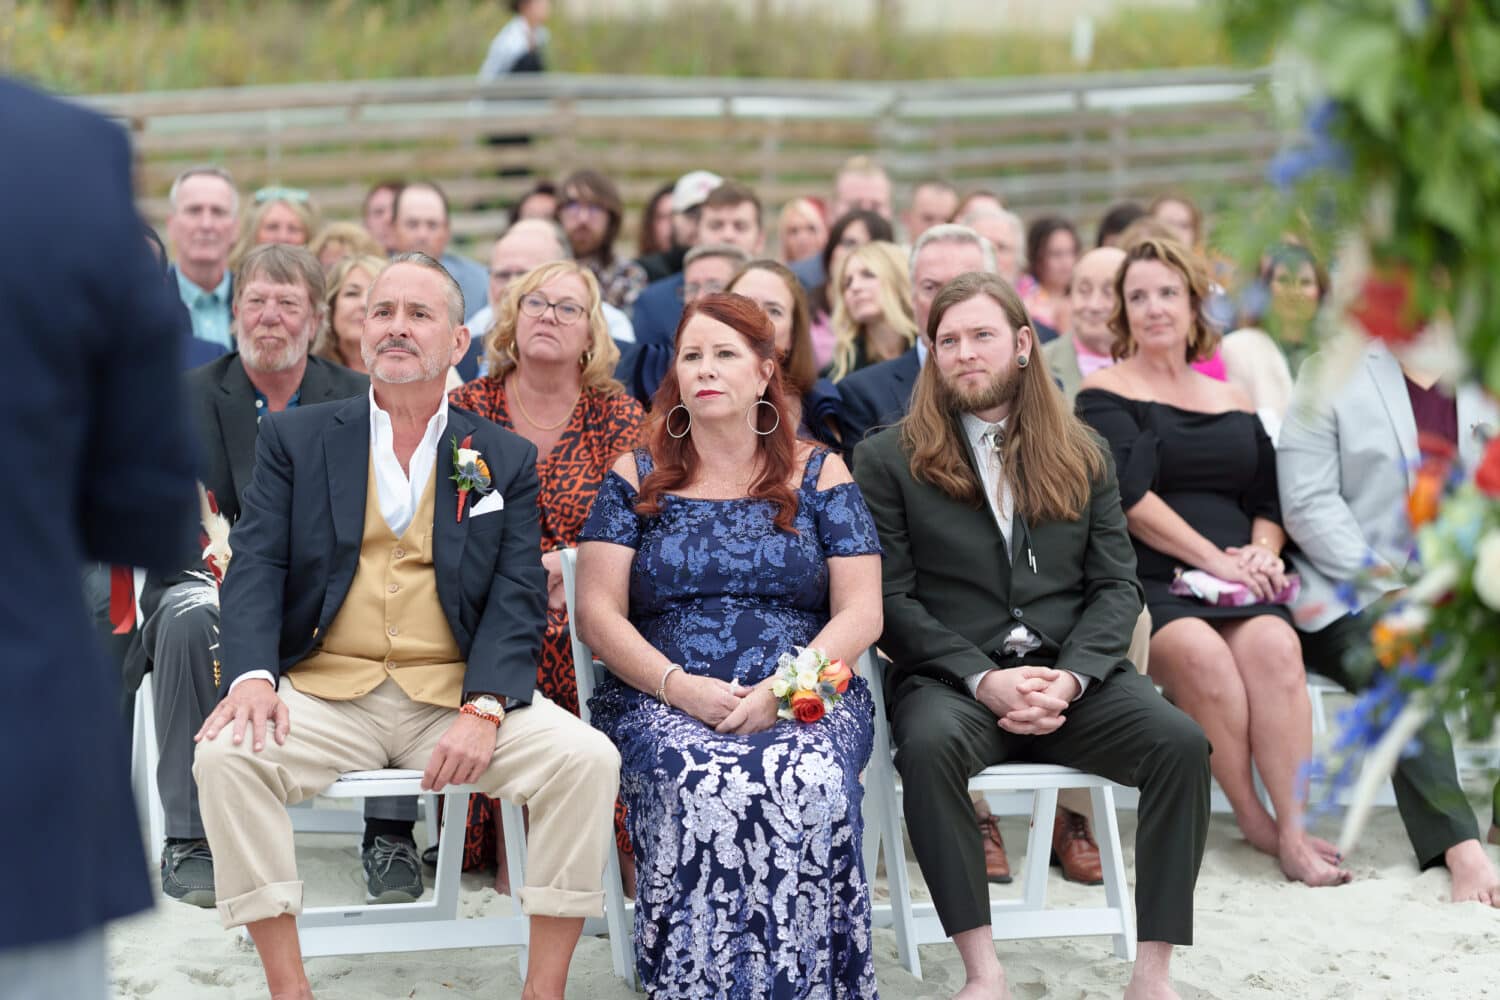 Family listening to the vows during ceremony - 21 Main Events - North Myrtle Beach